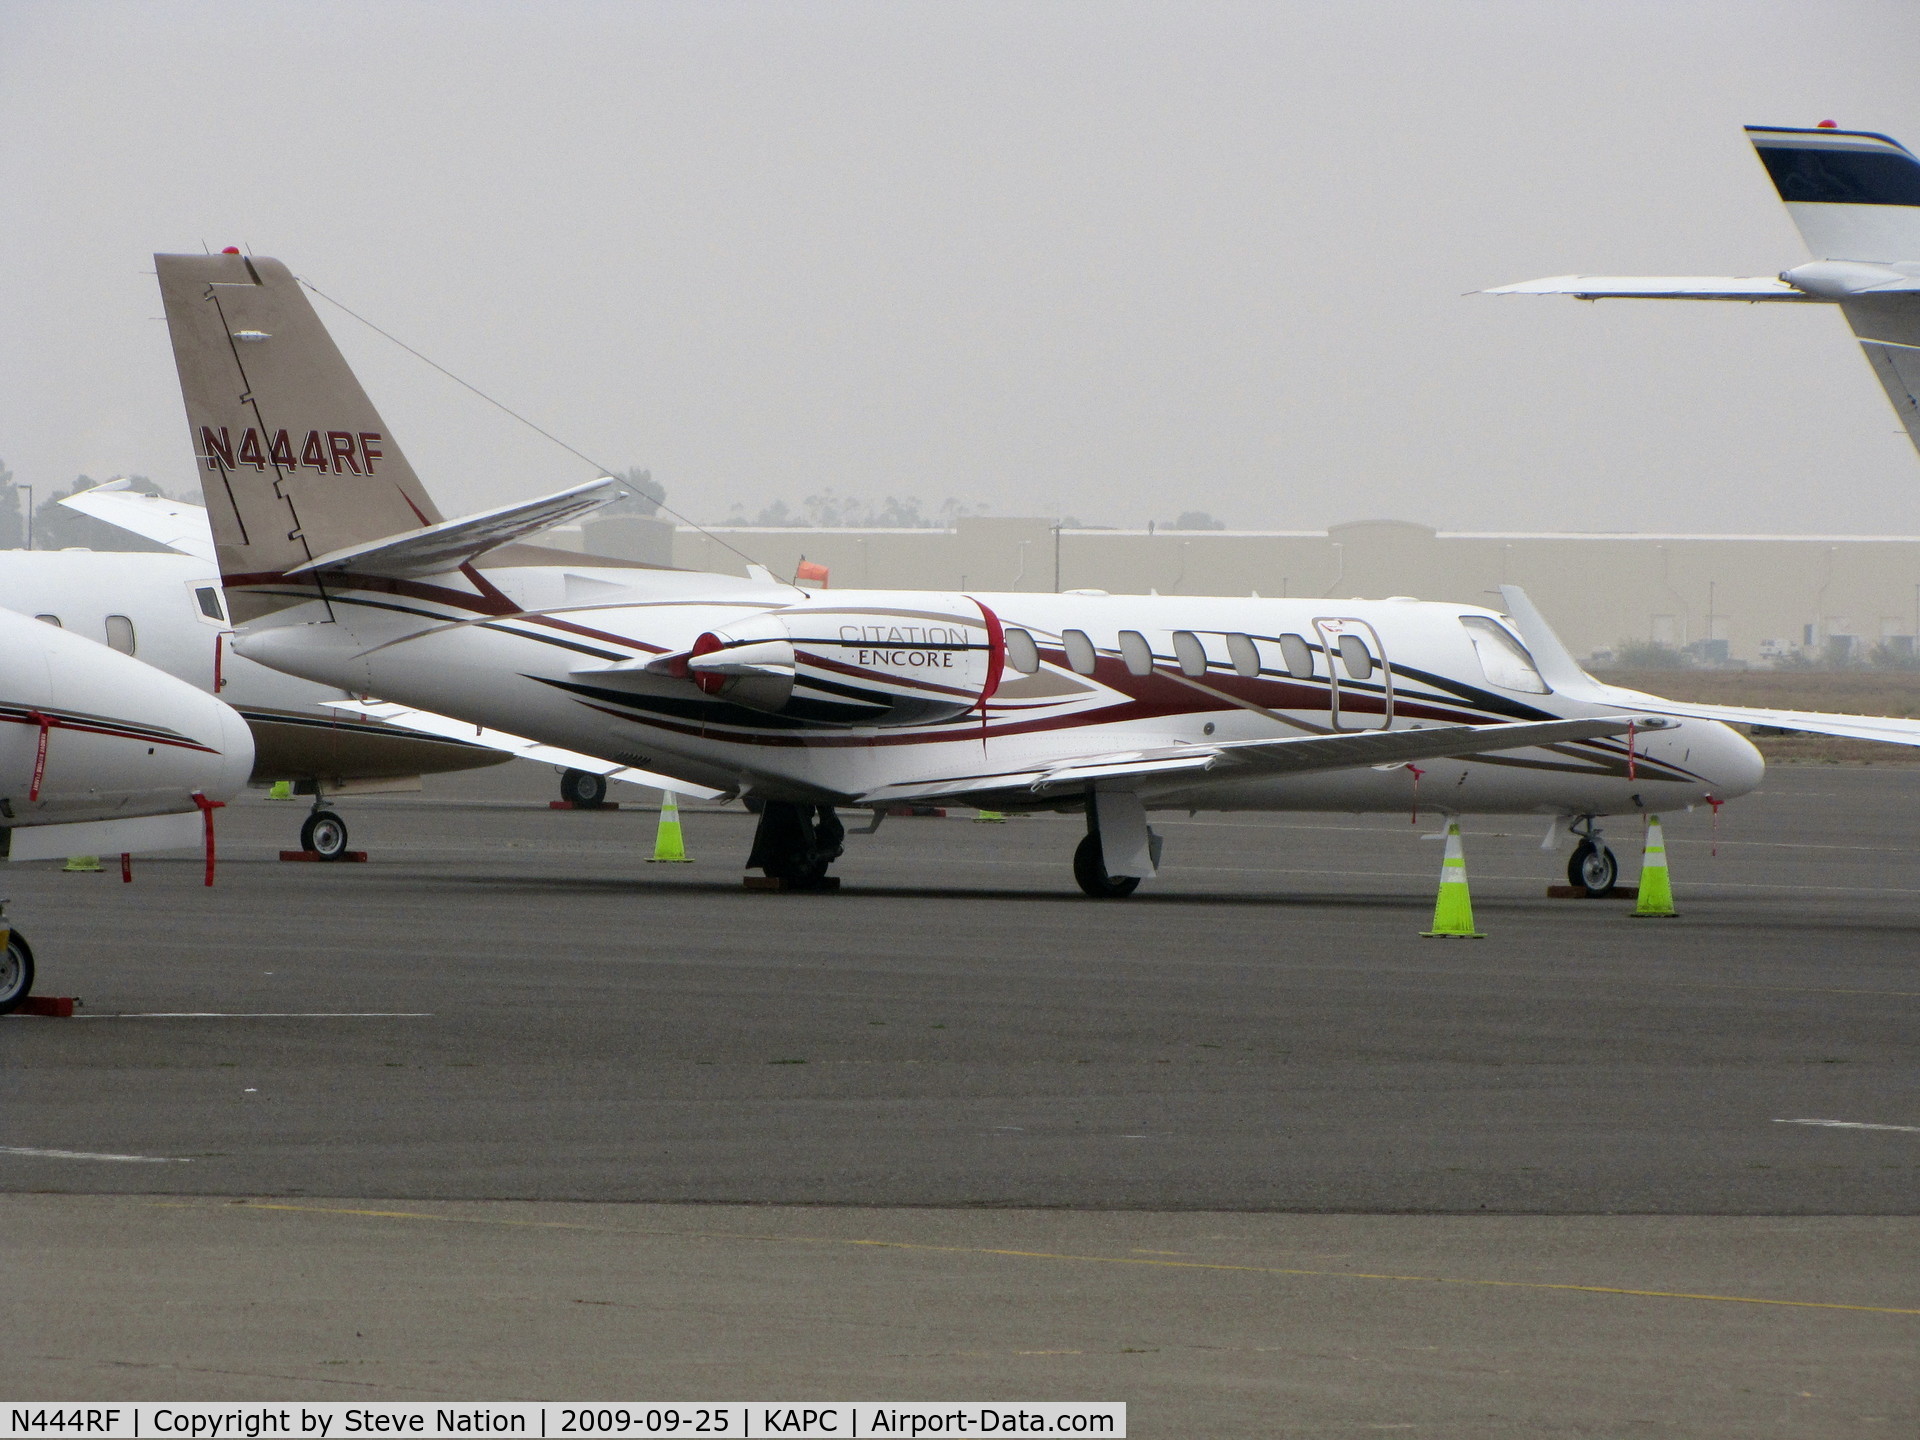 N444RF, 2001 Cessna 560 Citation Encore C/N 560-0559, Ontario, OR-based 2001 Cessna 560 visiting wine country in early morning fog